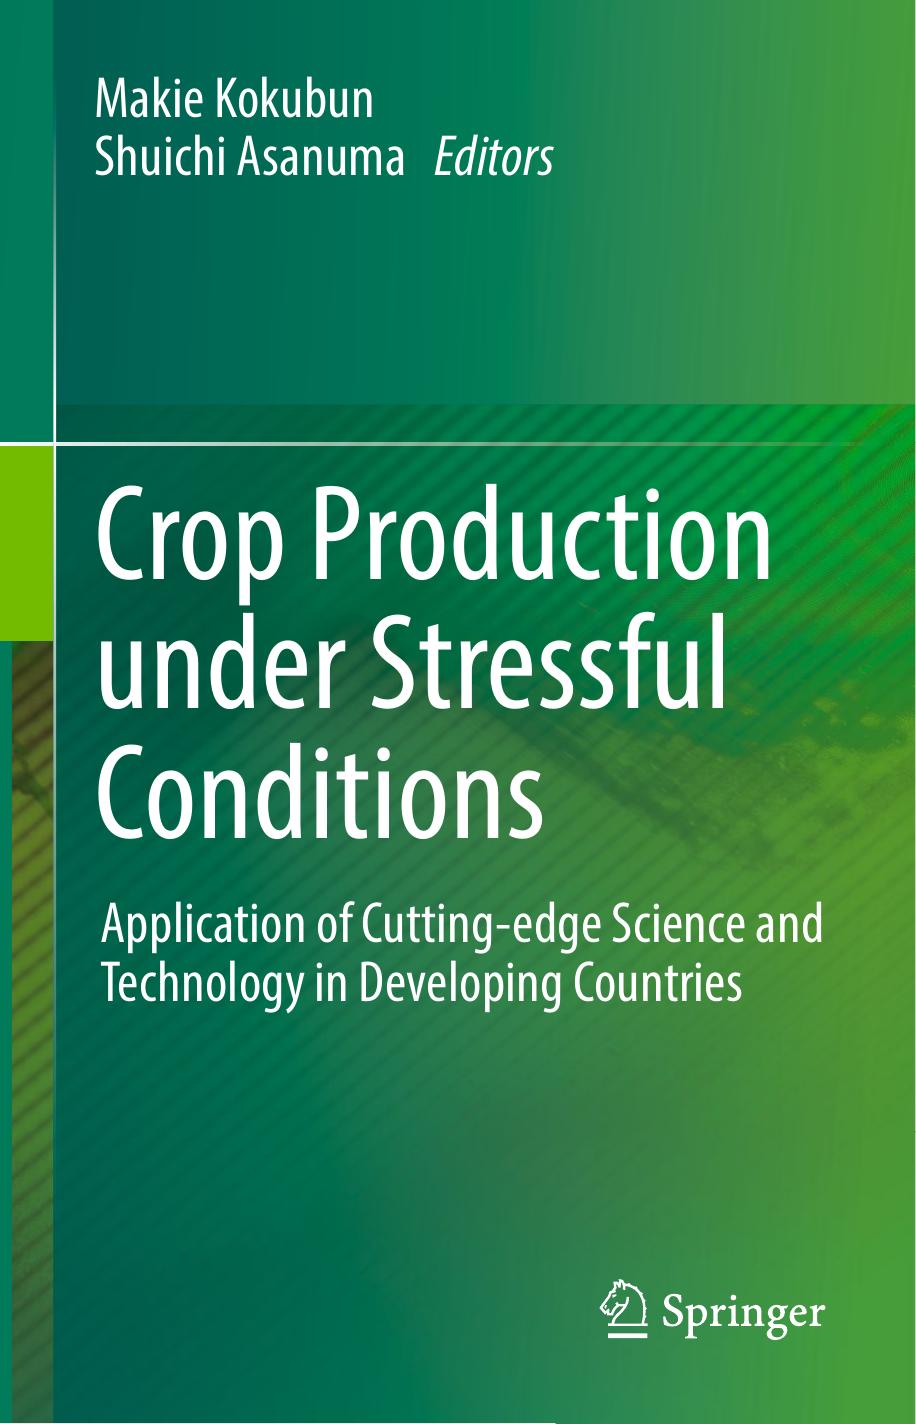 Crop Production under Stressful Conditions 2018